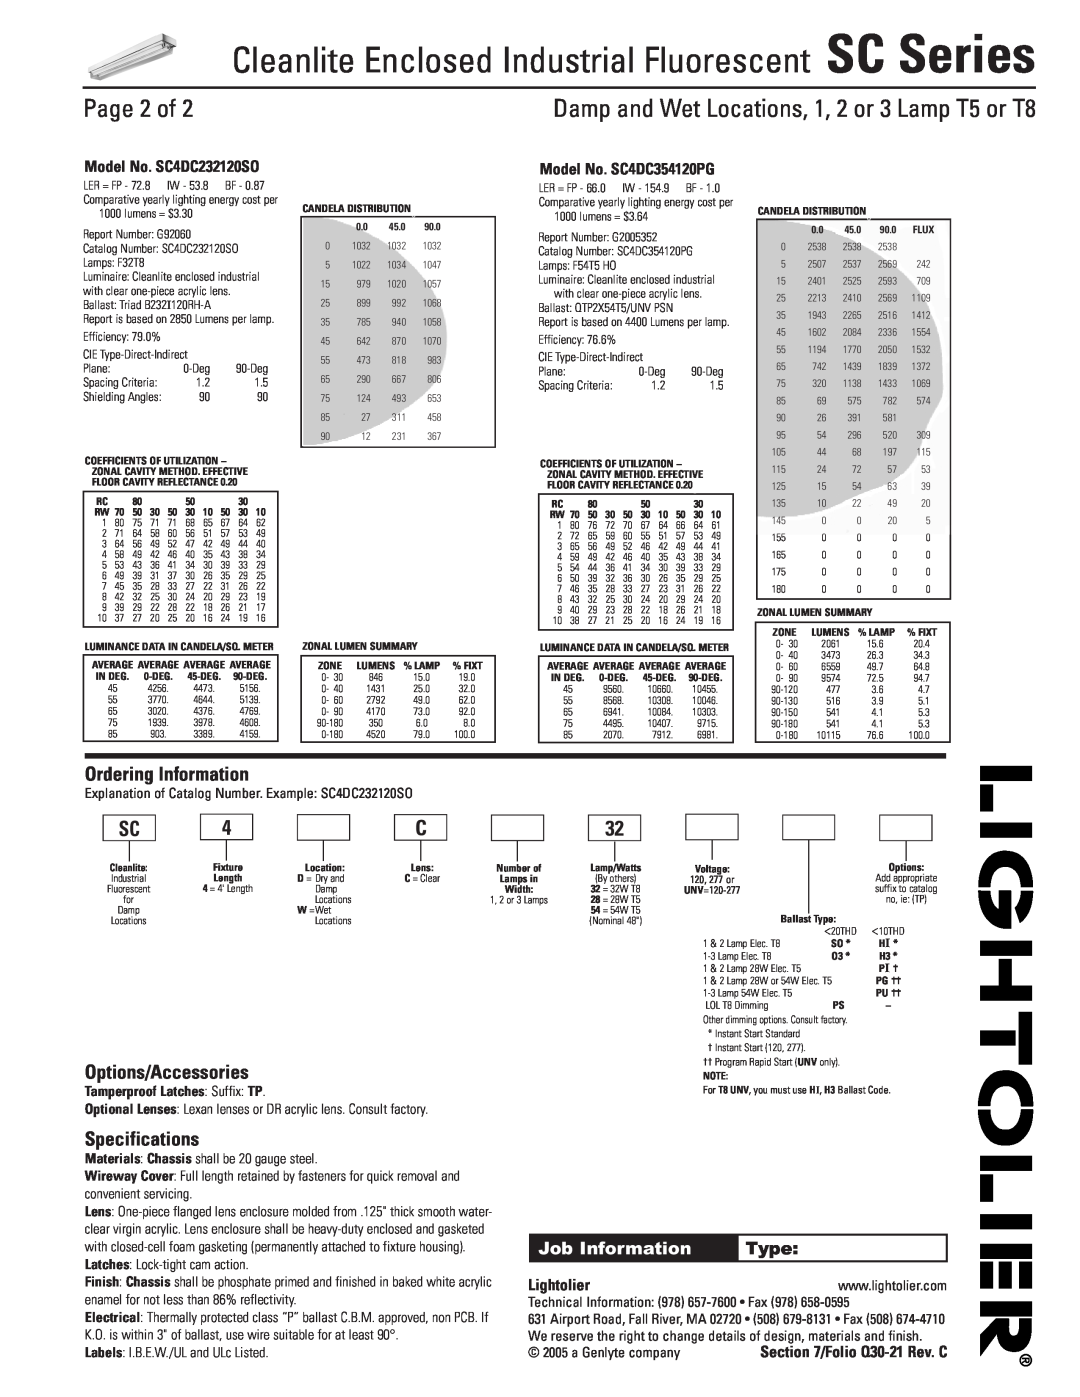 Lightolier SC Series Page 2 of, Ordering Information, Options/Accessories, Specifications, Model No. SC4DC232120SO, Type 